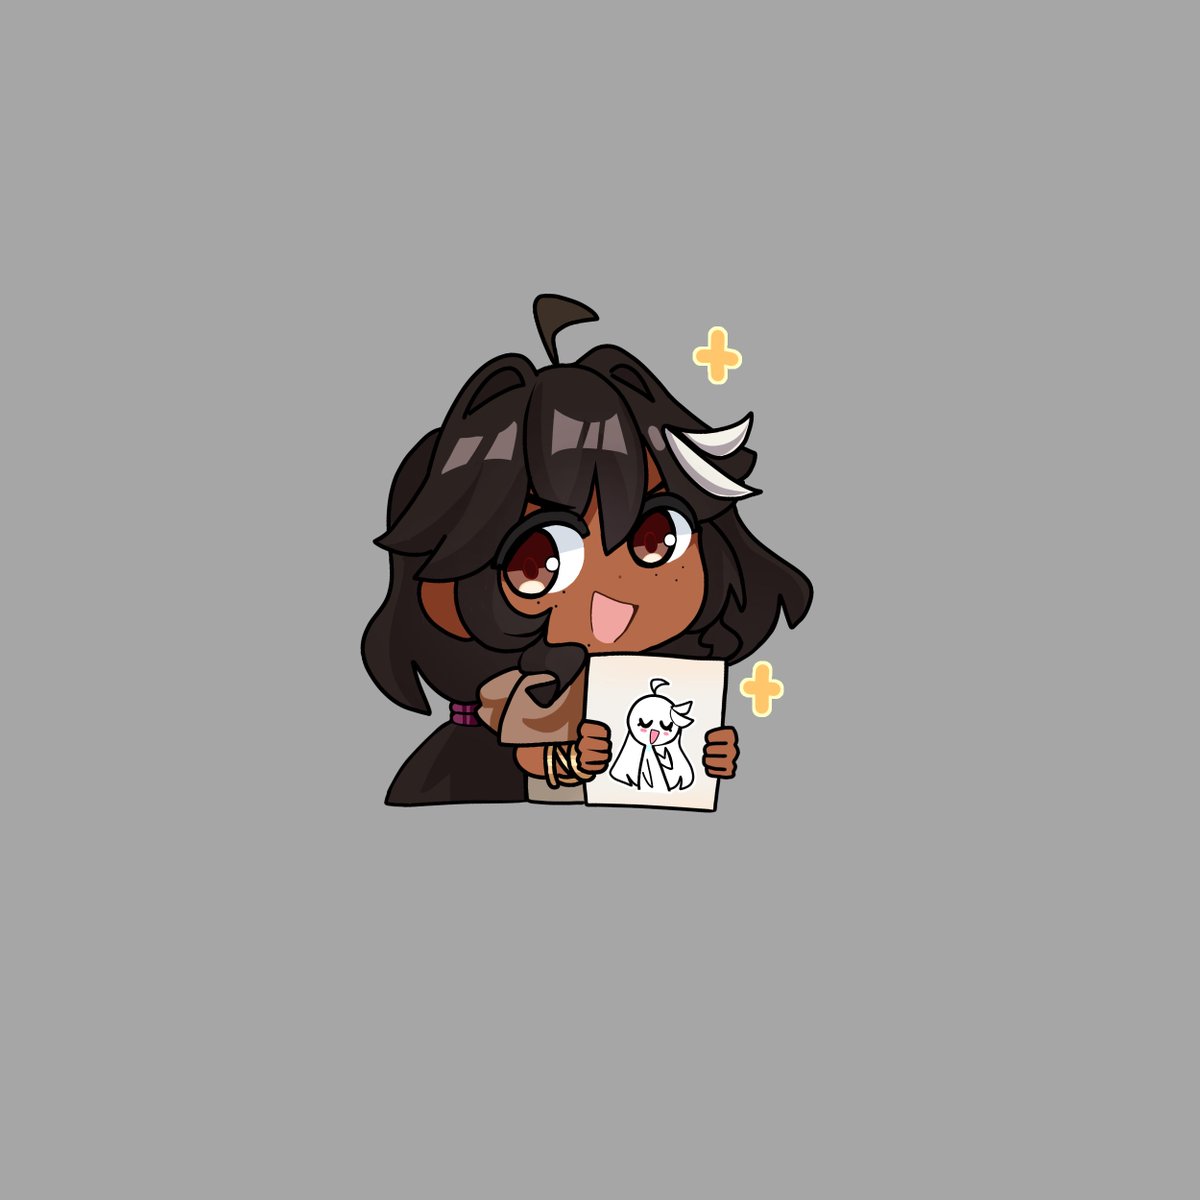 #chibi #oc another test